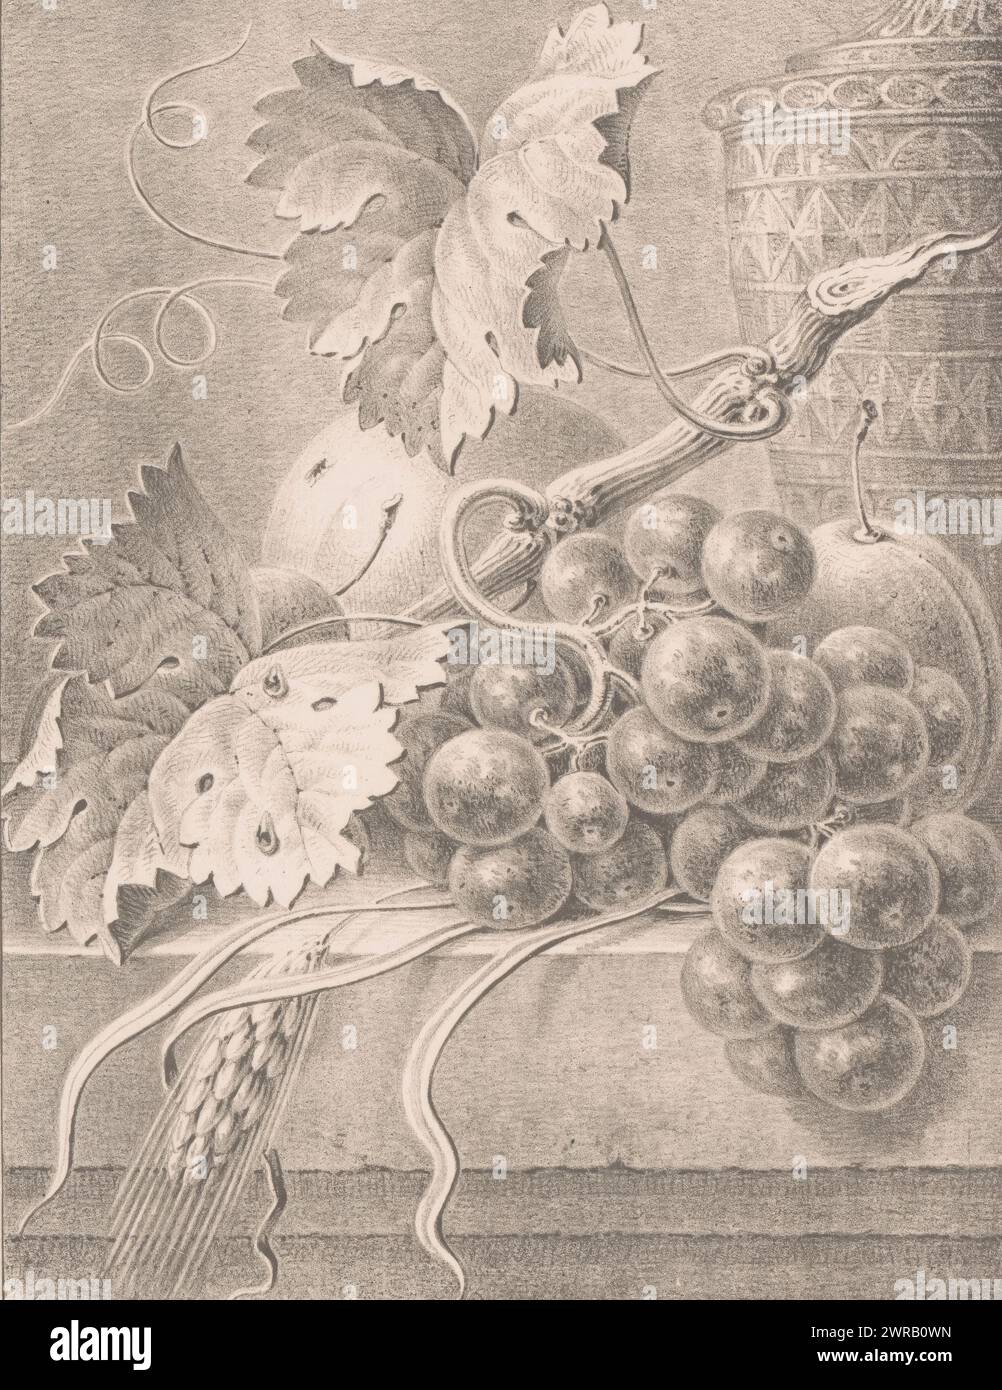 Still life with fruits and decorated pot, On a stone balustrade lies a bunch of grapes on a branch with leaves, a corn stalk, a peach and a plum., print maker: Maria Geertruida de Goeje-Barbiers, (attributed to), Haarlem, 1811 - 1849, paper, height 240 mm × width 190 mm, print Stock Photo